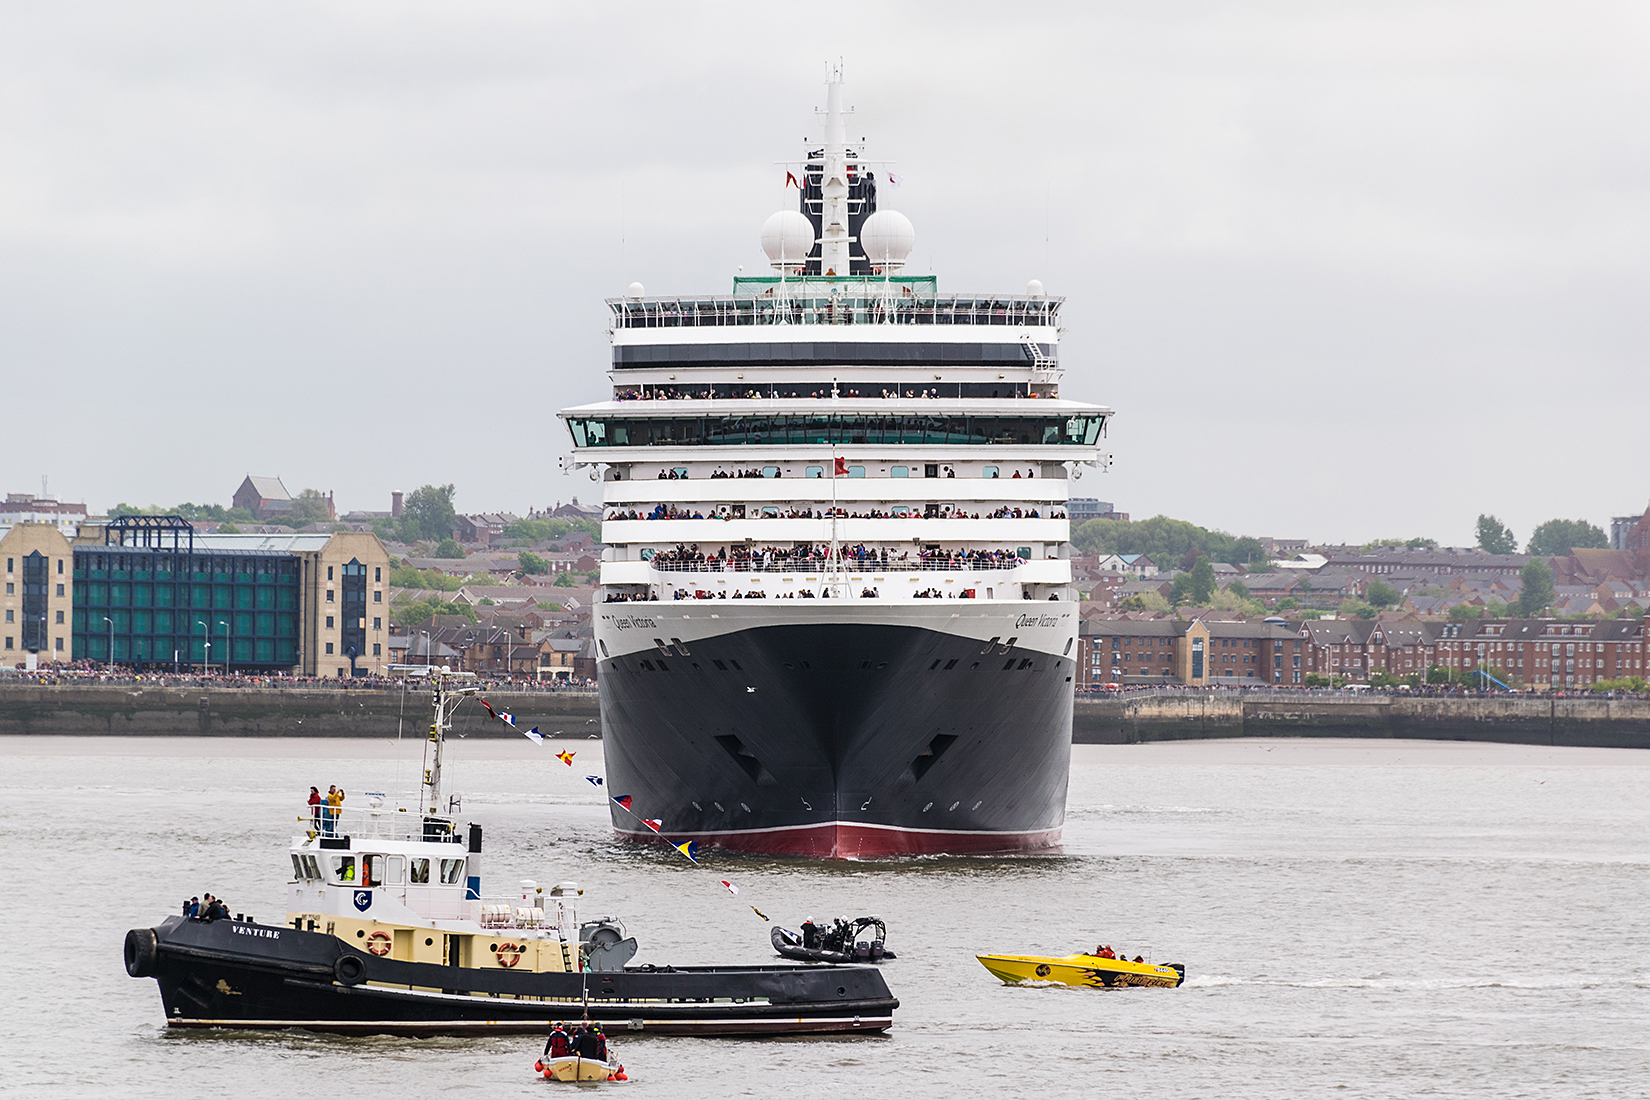 Lots of small boat attention as Queen Victoria continues her manouvers